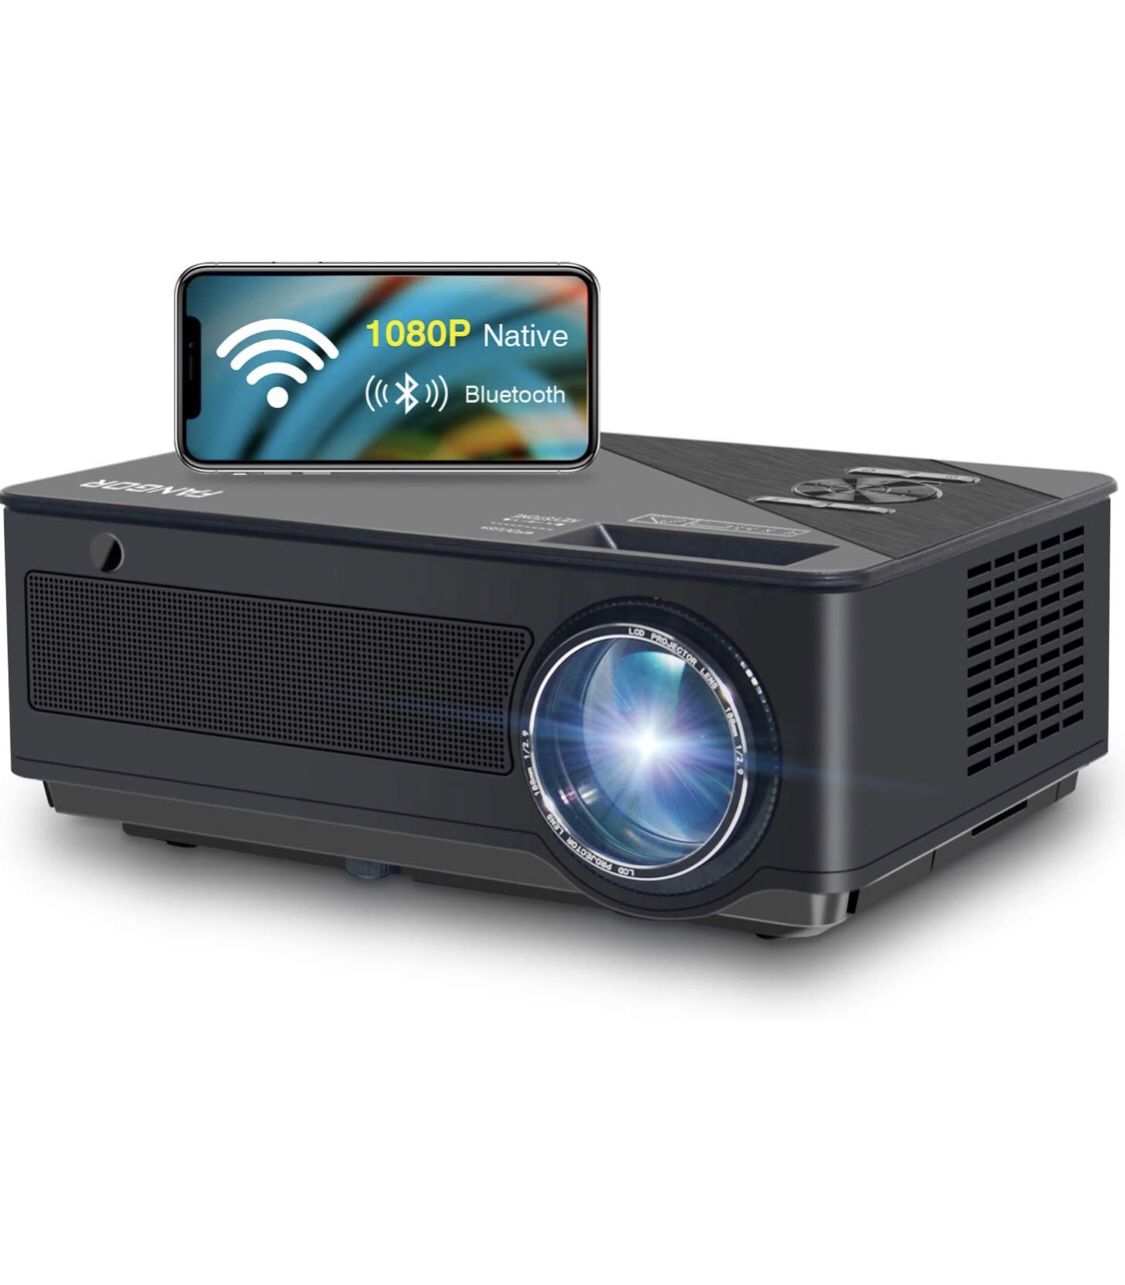 Native 1080p Full HD Projector, WiFi Projector, Bluetooth Projector, FANGOR 7500 Lumens/250 Display/ Contrast 8000: 1 Full HD Theater Projector with